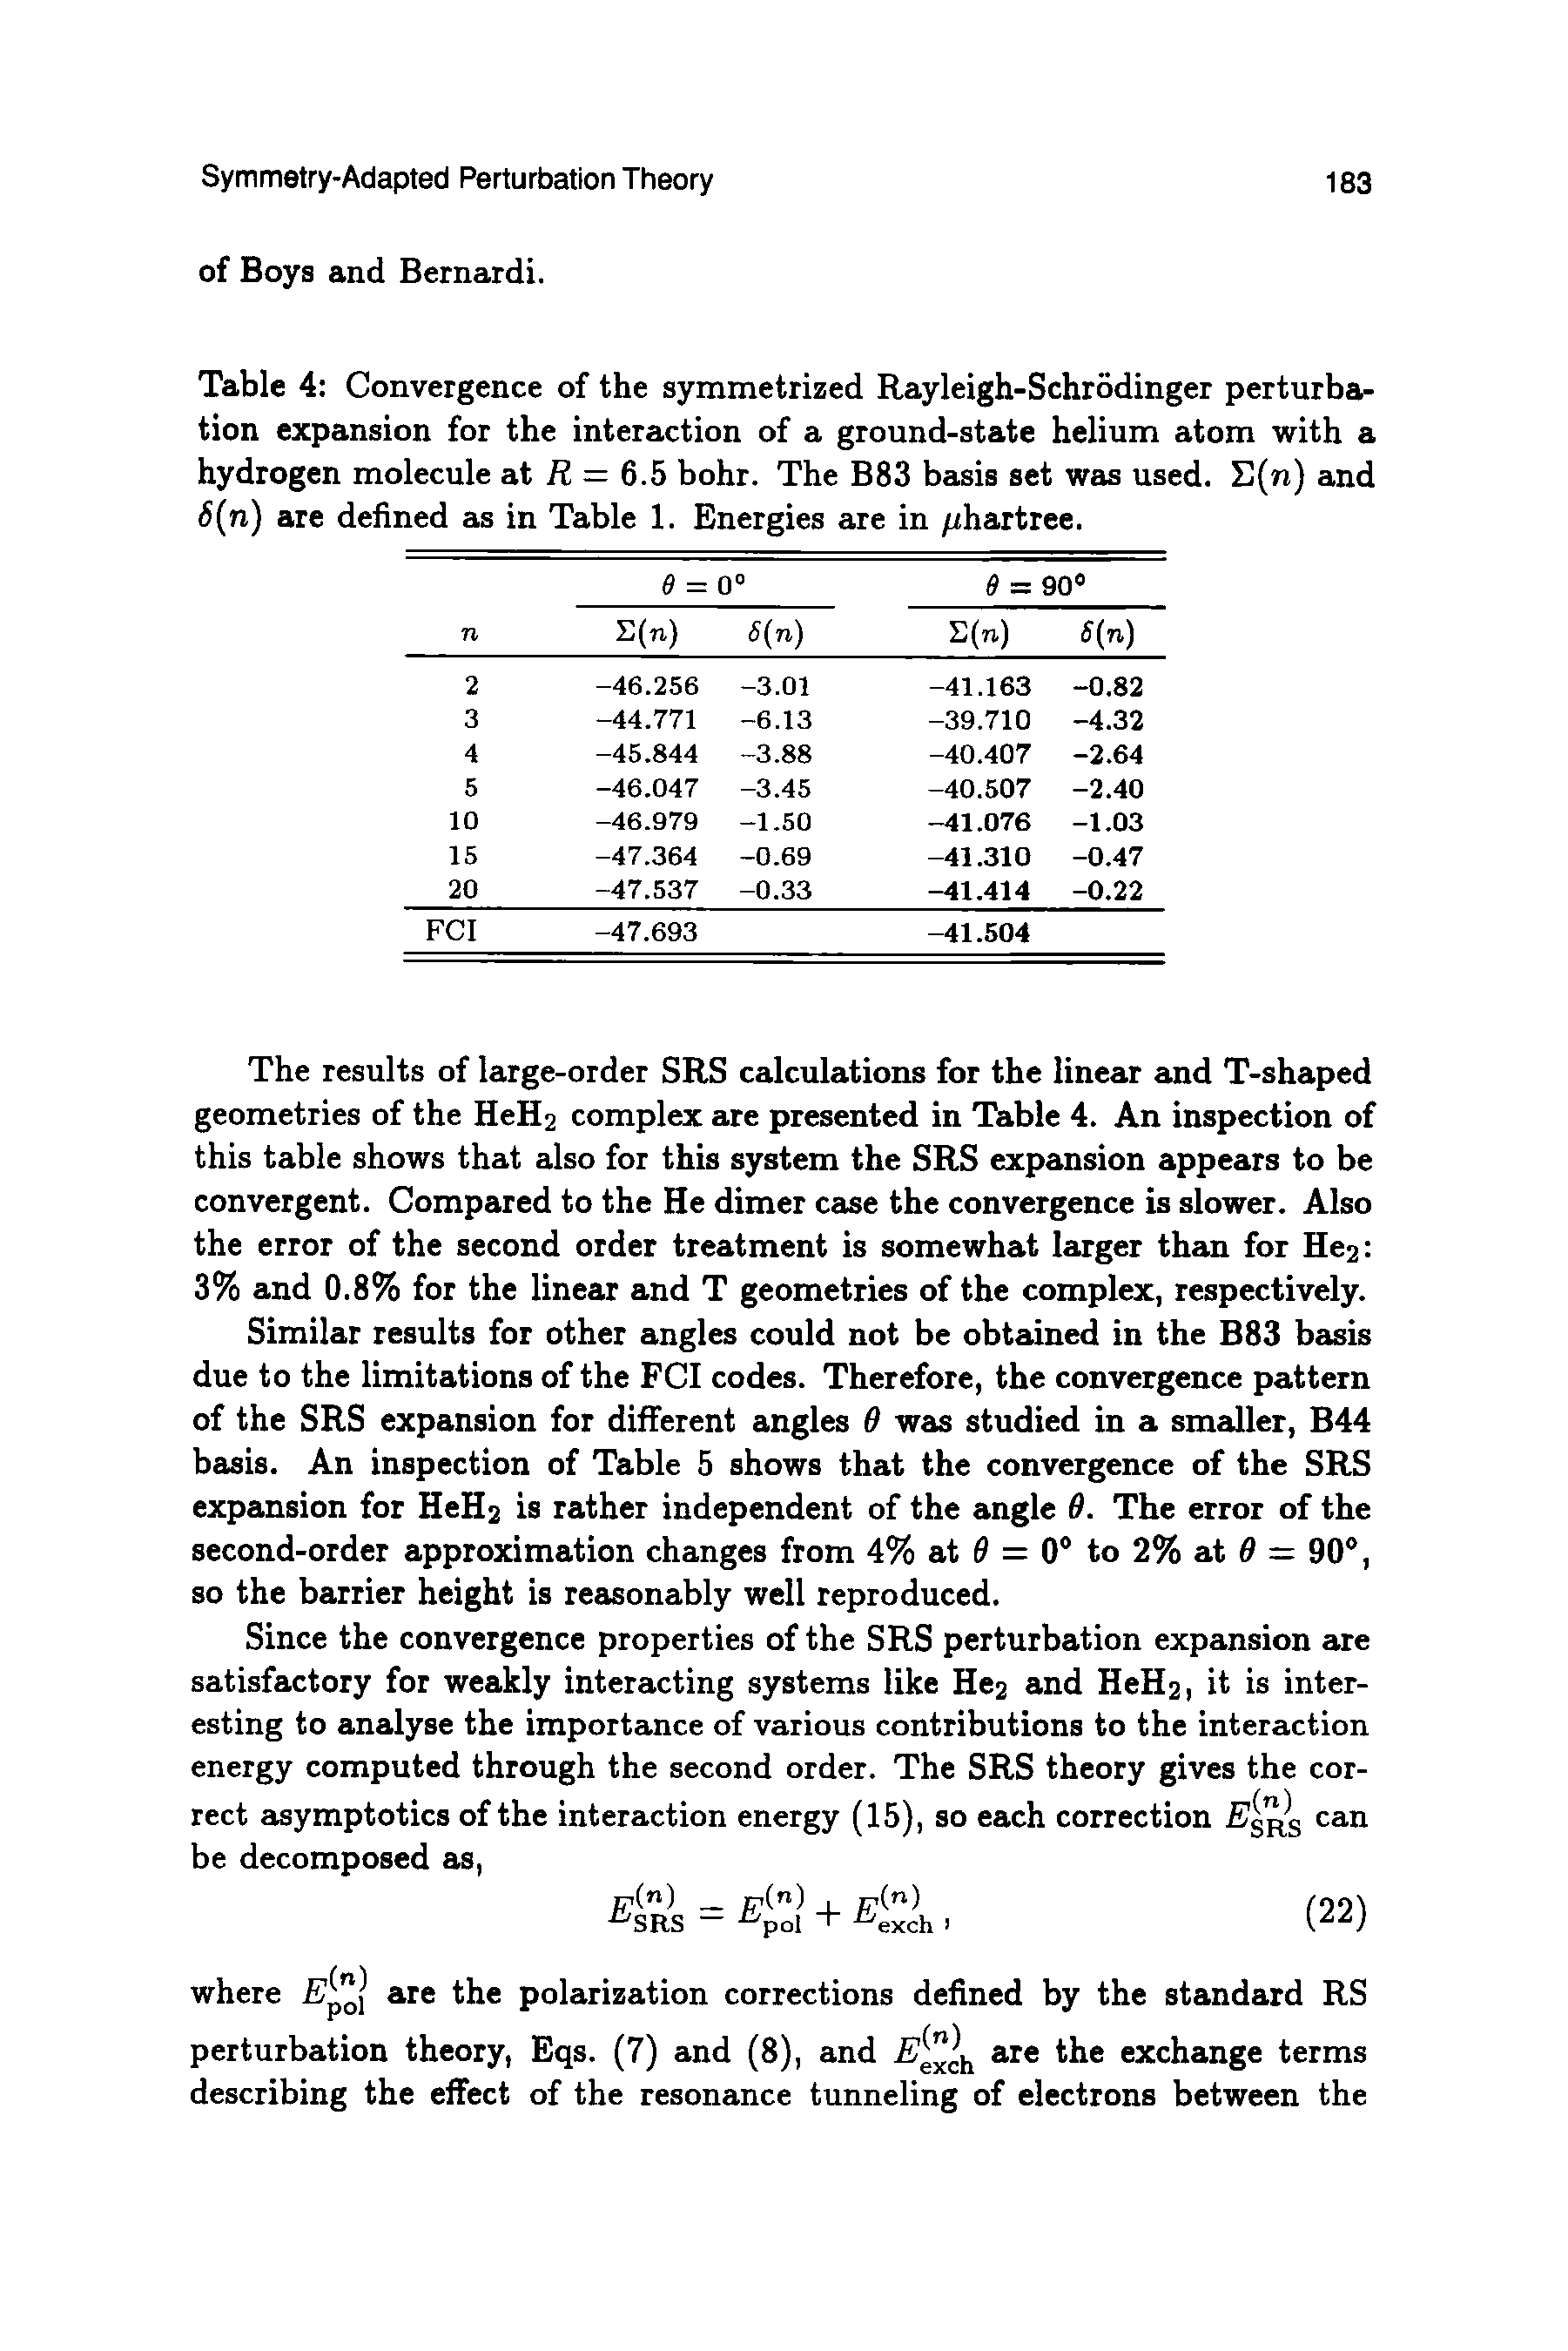 Table 4 Convergence of the symmetrized Rayleigh-Schrodinger perturbation expansion for the interaction of a ground-state helium atom with a hydrogen molecule at R = 6.5 bohr. The B83 basis set was used. (n) and 6(n) are defined as in Table 1. Energies are in /ihartree.